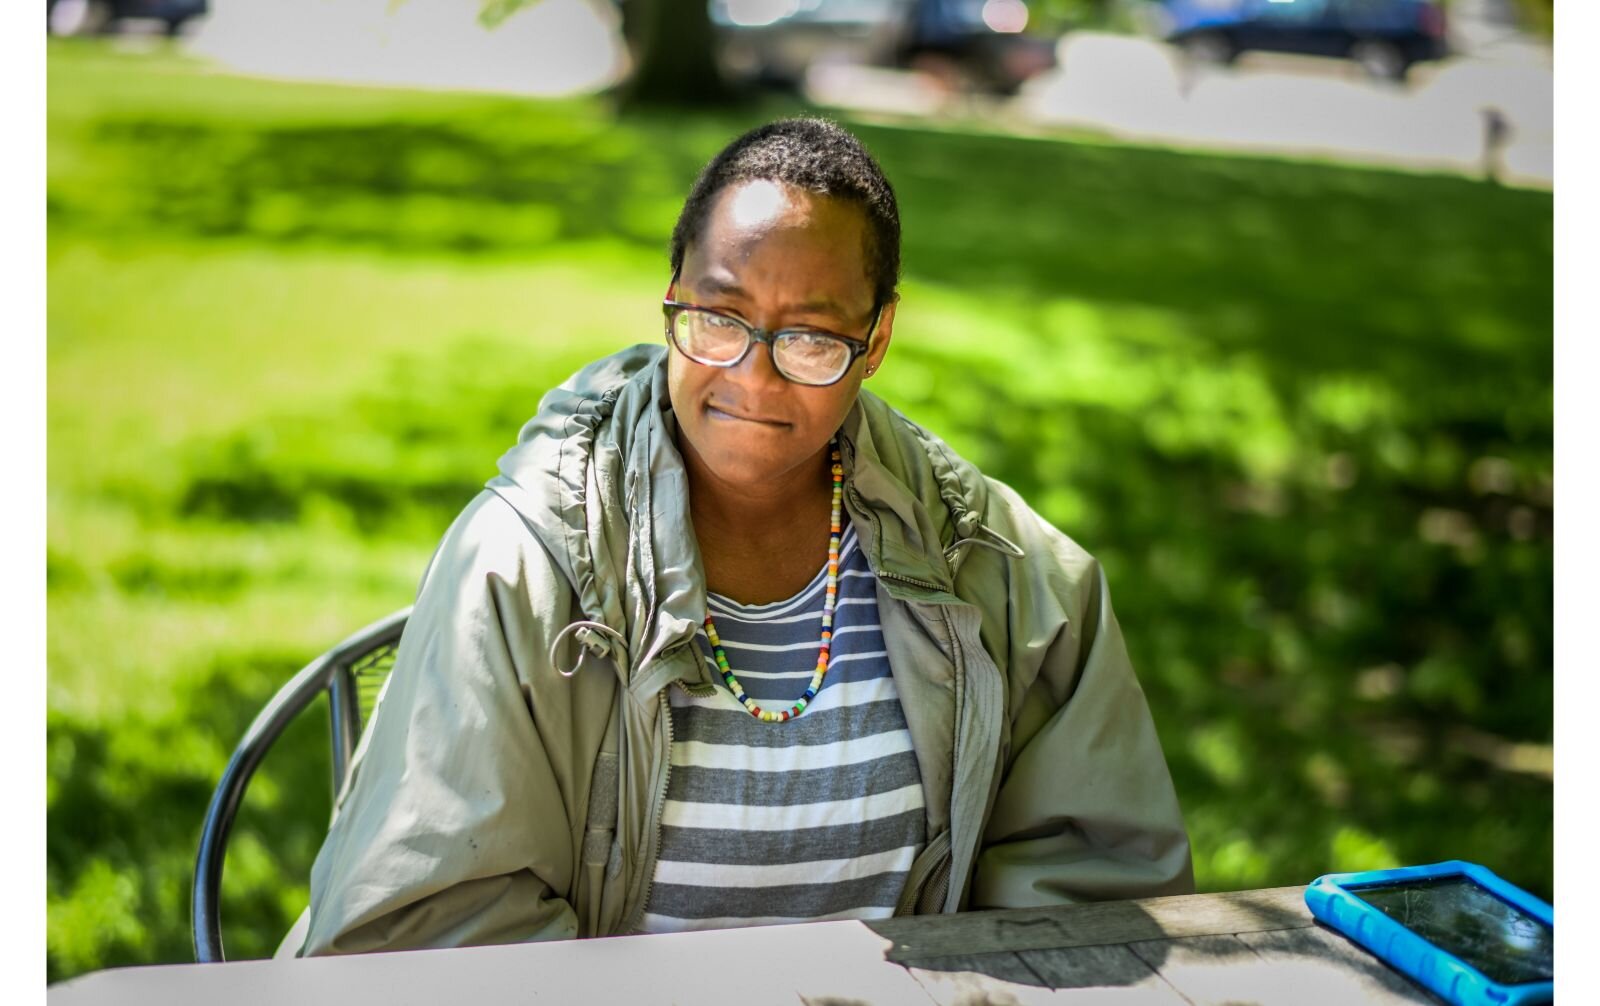 "It's sad, it's so sad. And when you try to find the resources to get the help you need.... Basically, you're on your own," Tamika Williams says.